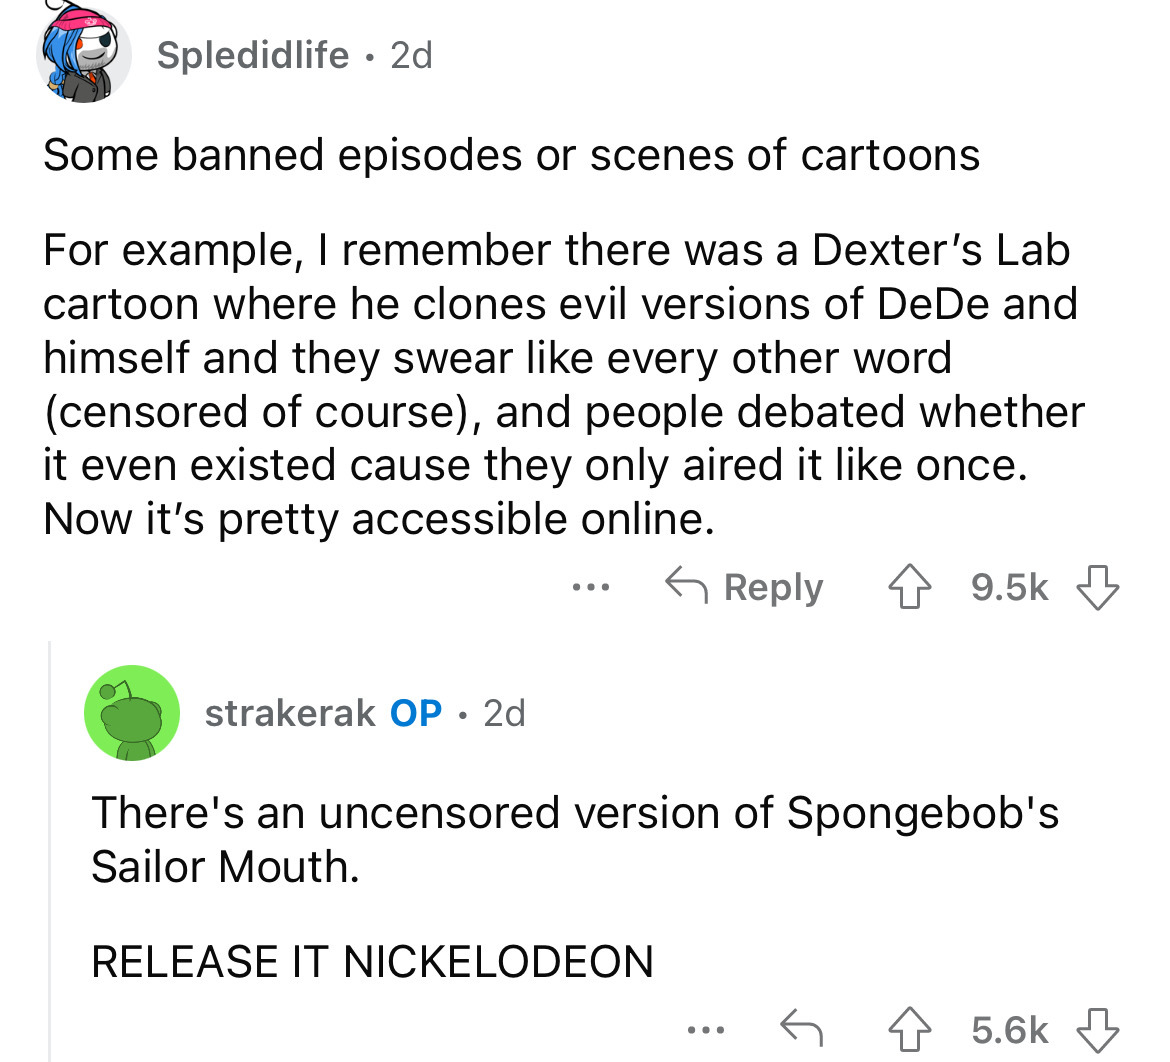 angle - Spledidlife 2d Some banned episodes or scenes of cartoons For example, I remember there was a Dexter's Lab cartoon where he clones evil versions of DeDe and himself and they swear every other word censored of course, and people debated whether it 